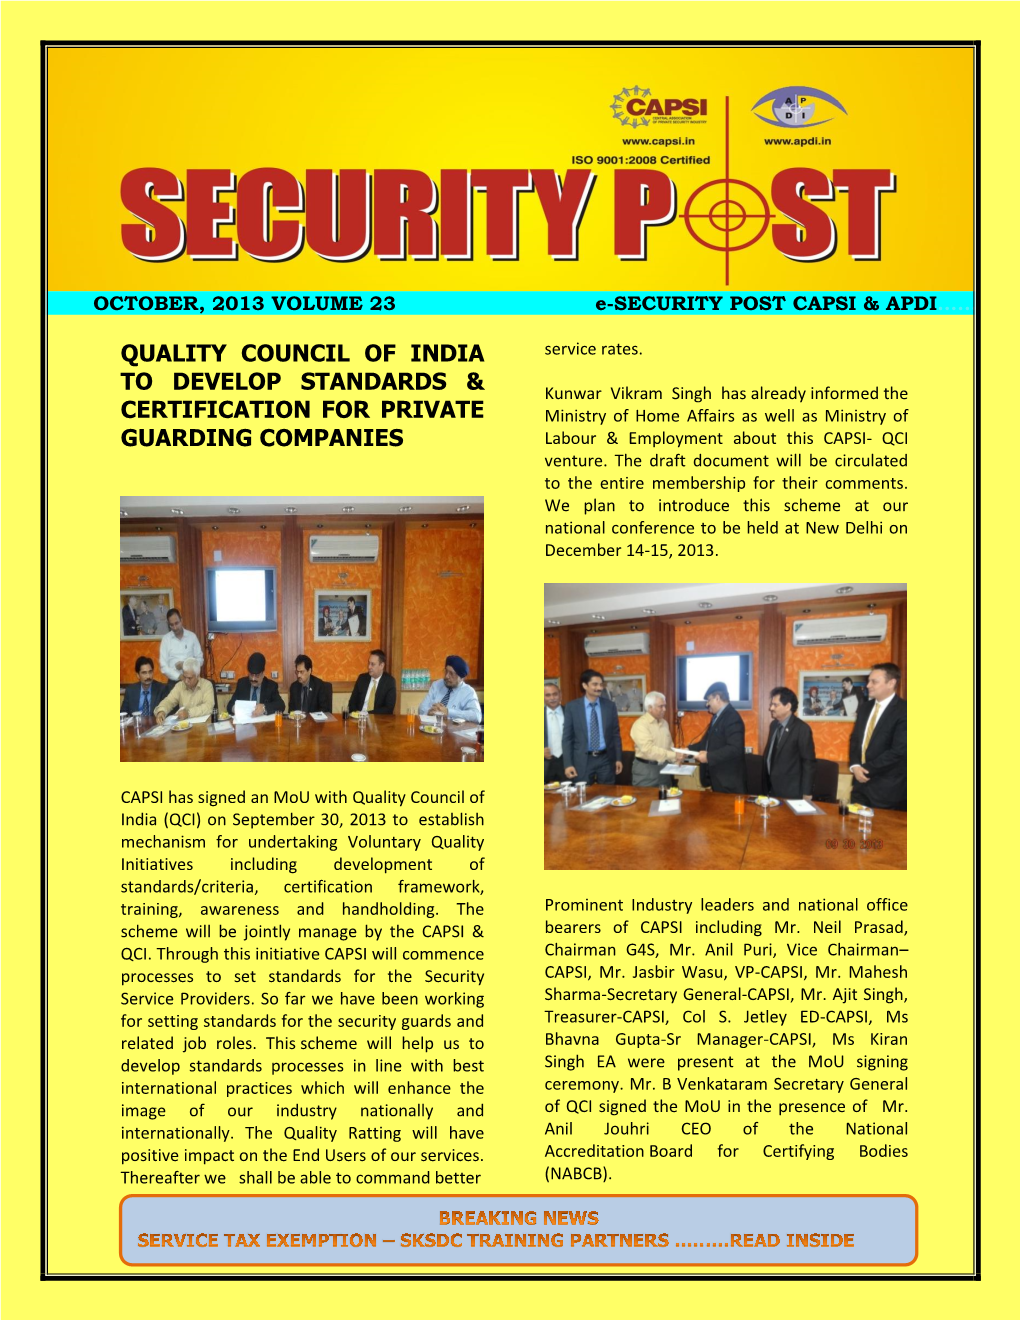 Quality Council of India to Develop Standards & Certification for Private Guarding Companies